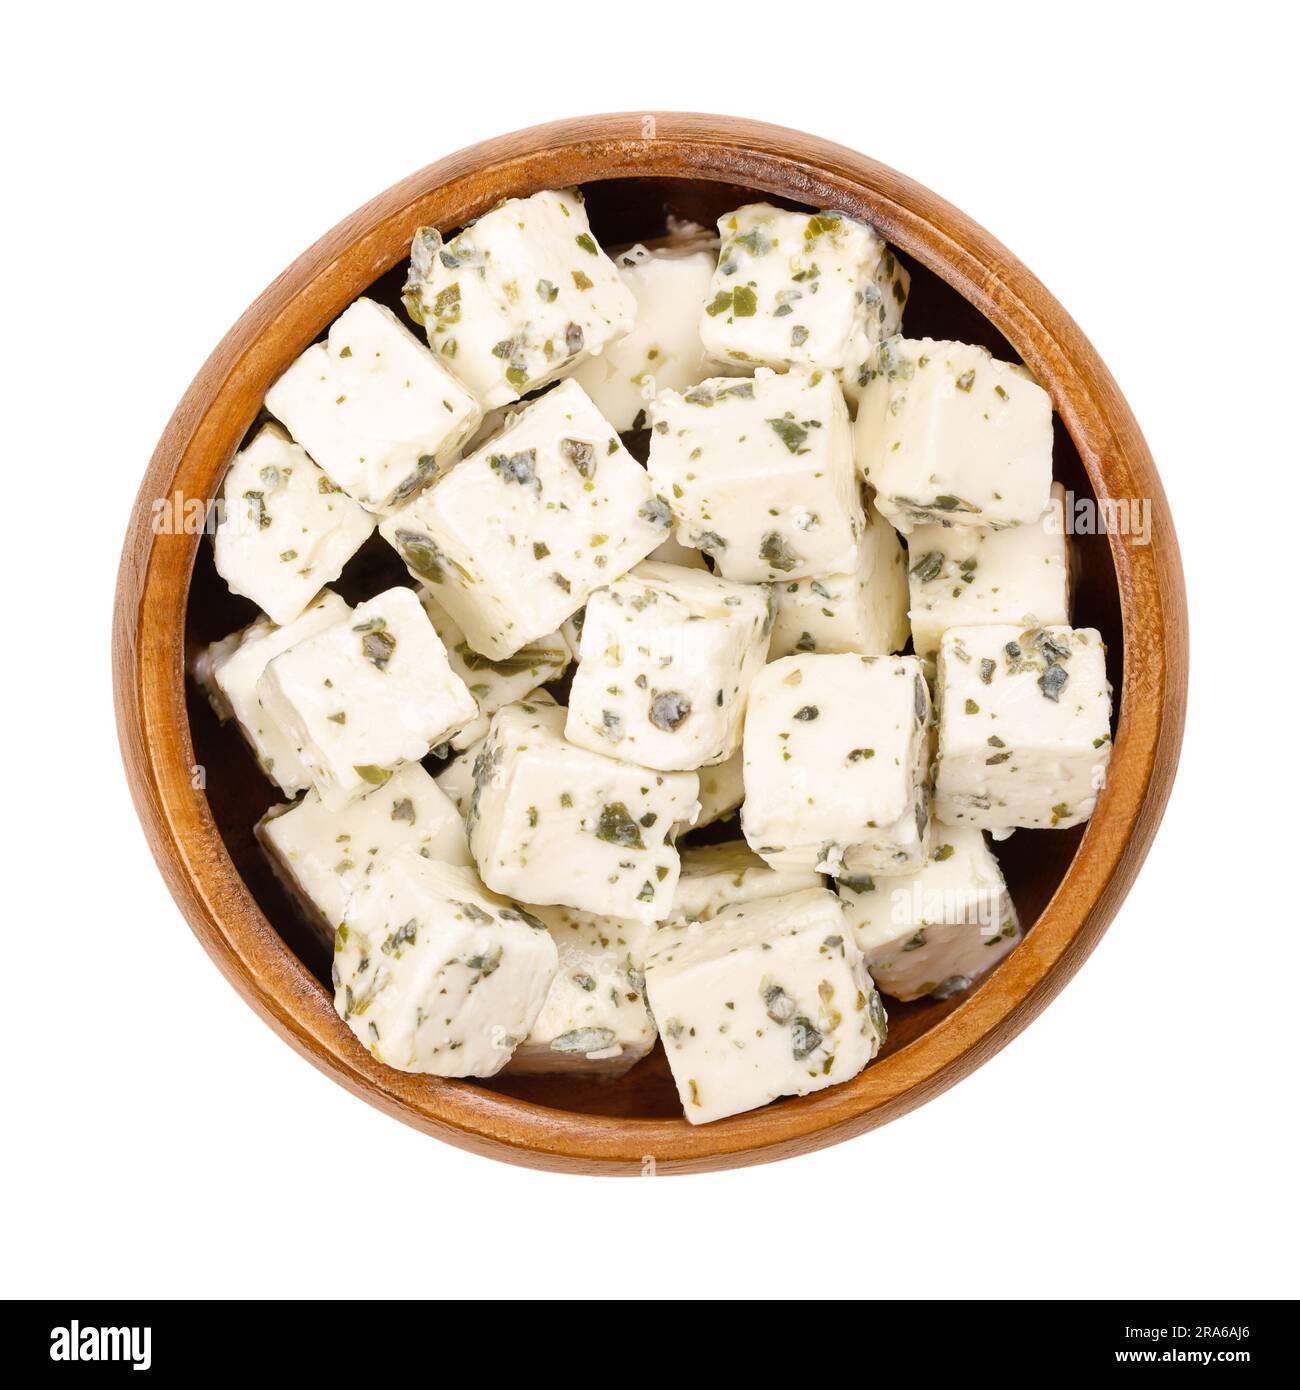 Greek feta cubes, brined cheese with Mediterranean herbs, in wooden bowl. Cheese, matured in brine, with soft and moist texture, fresh and salty taste. Stock Photo